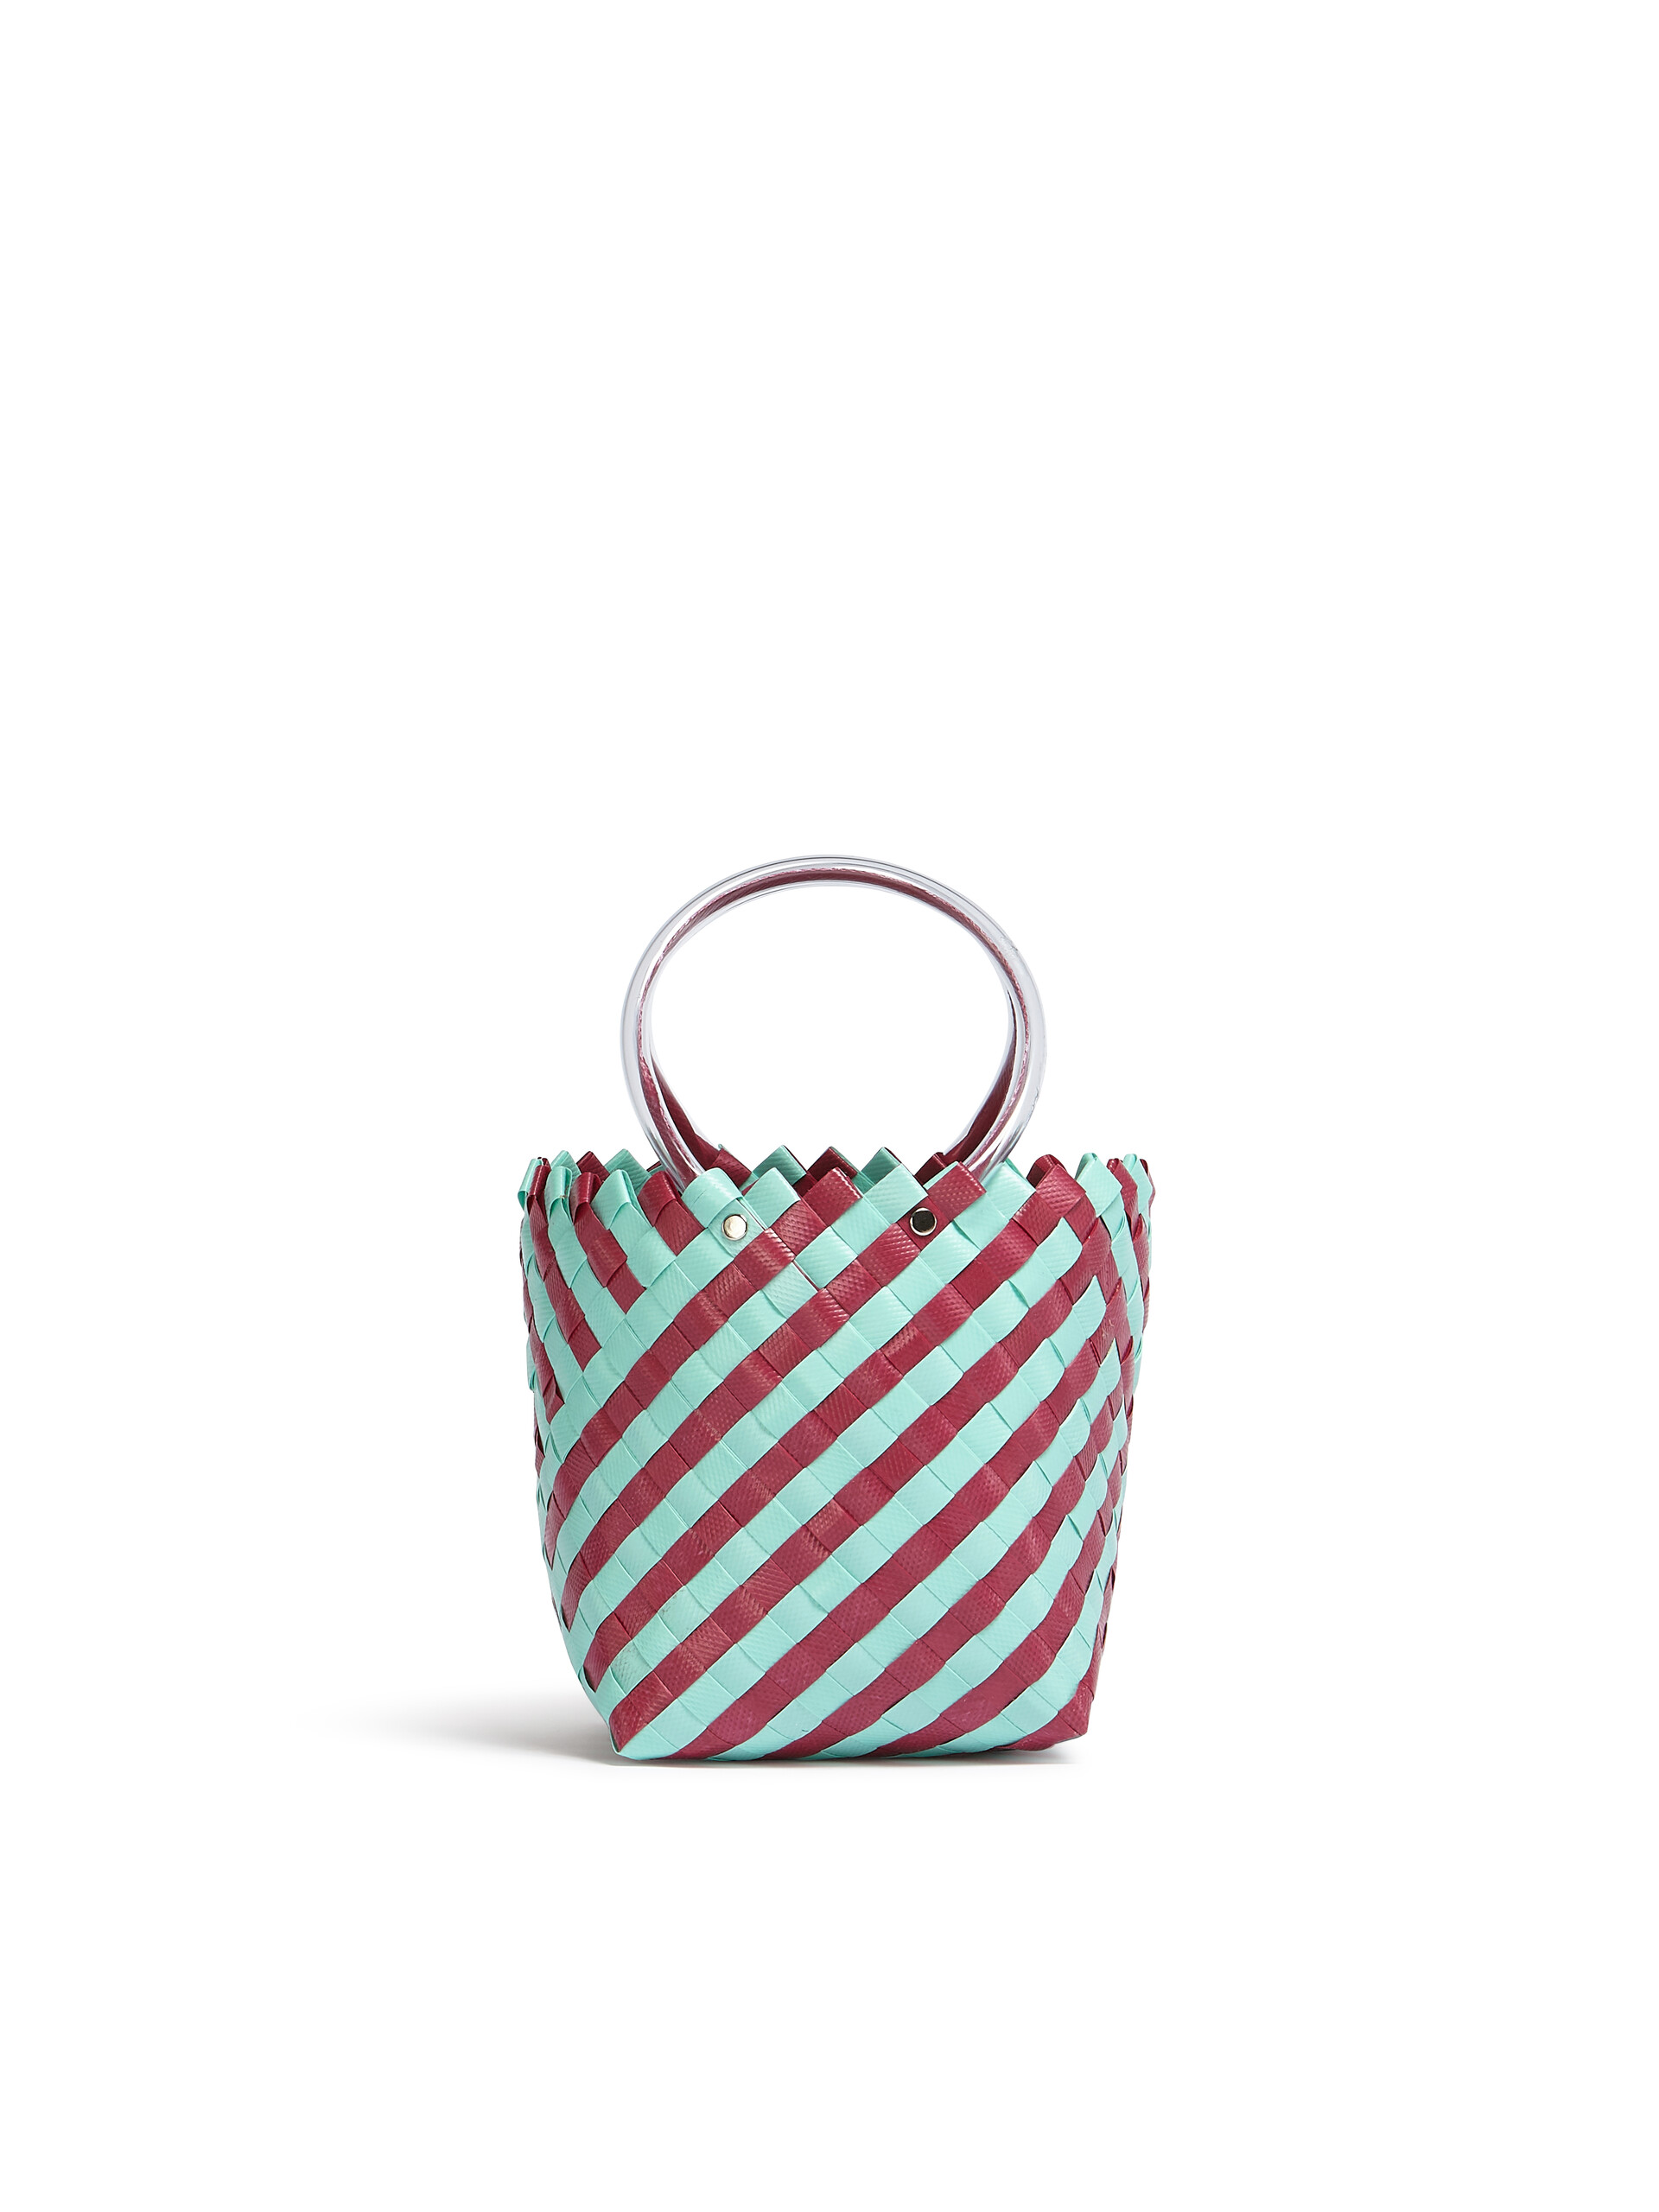 MARNI MARKET TAHA bag in green and burgundy woven material - Bags - Image 3